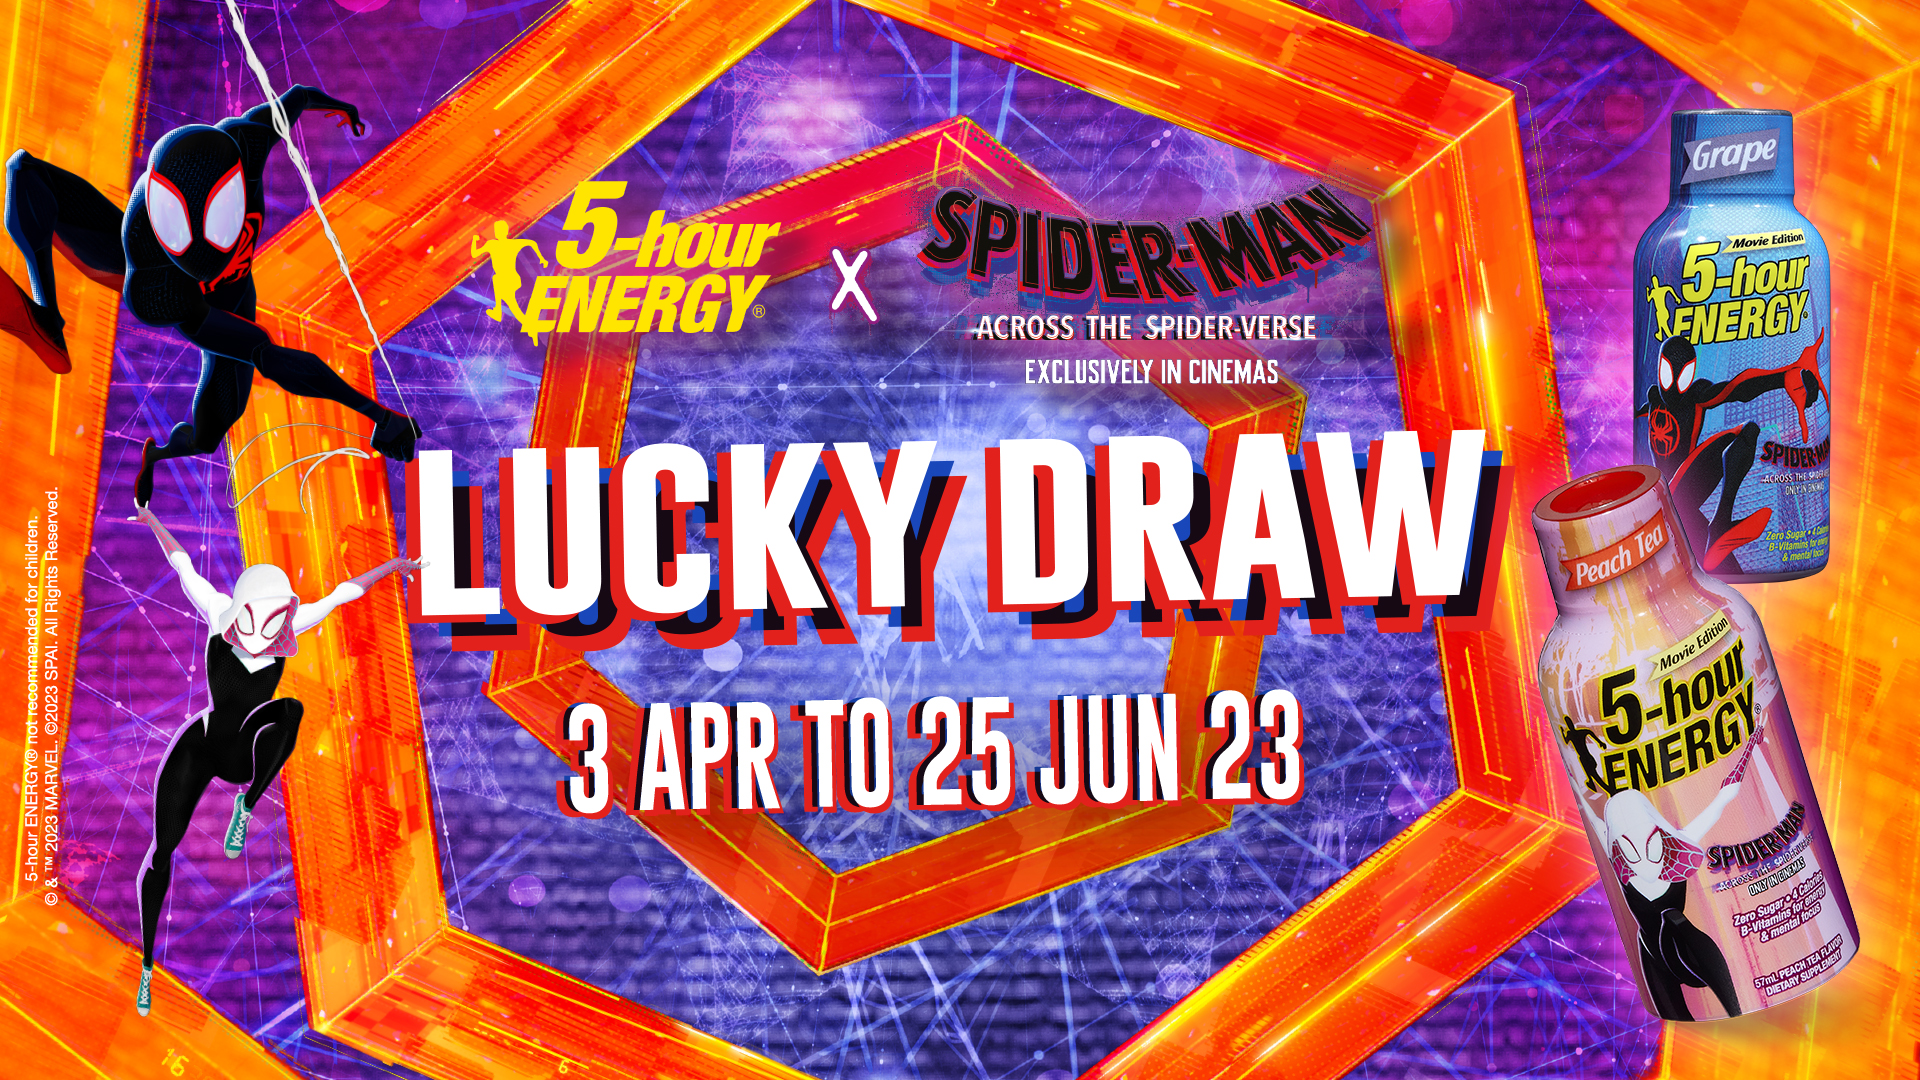 Legally Conducting Lucky Draws for Singapore Businesses 